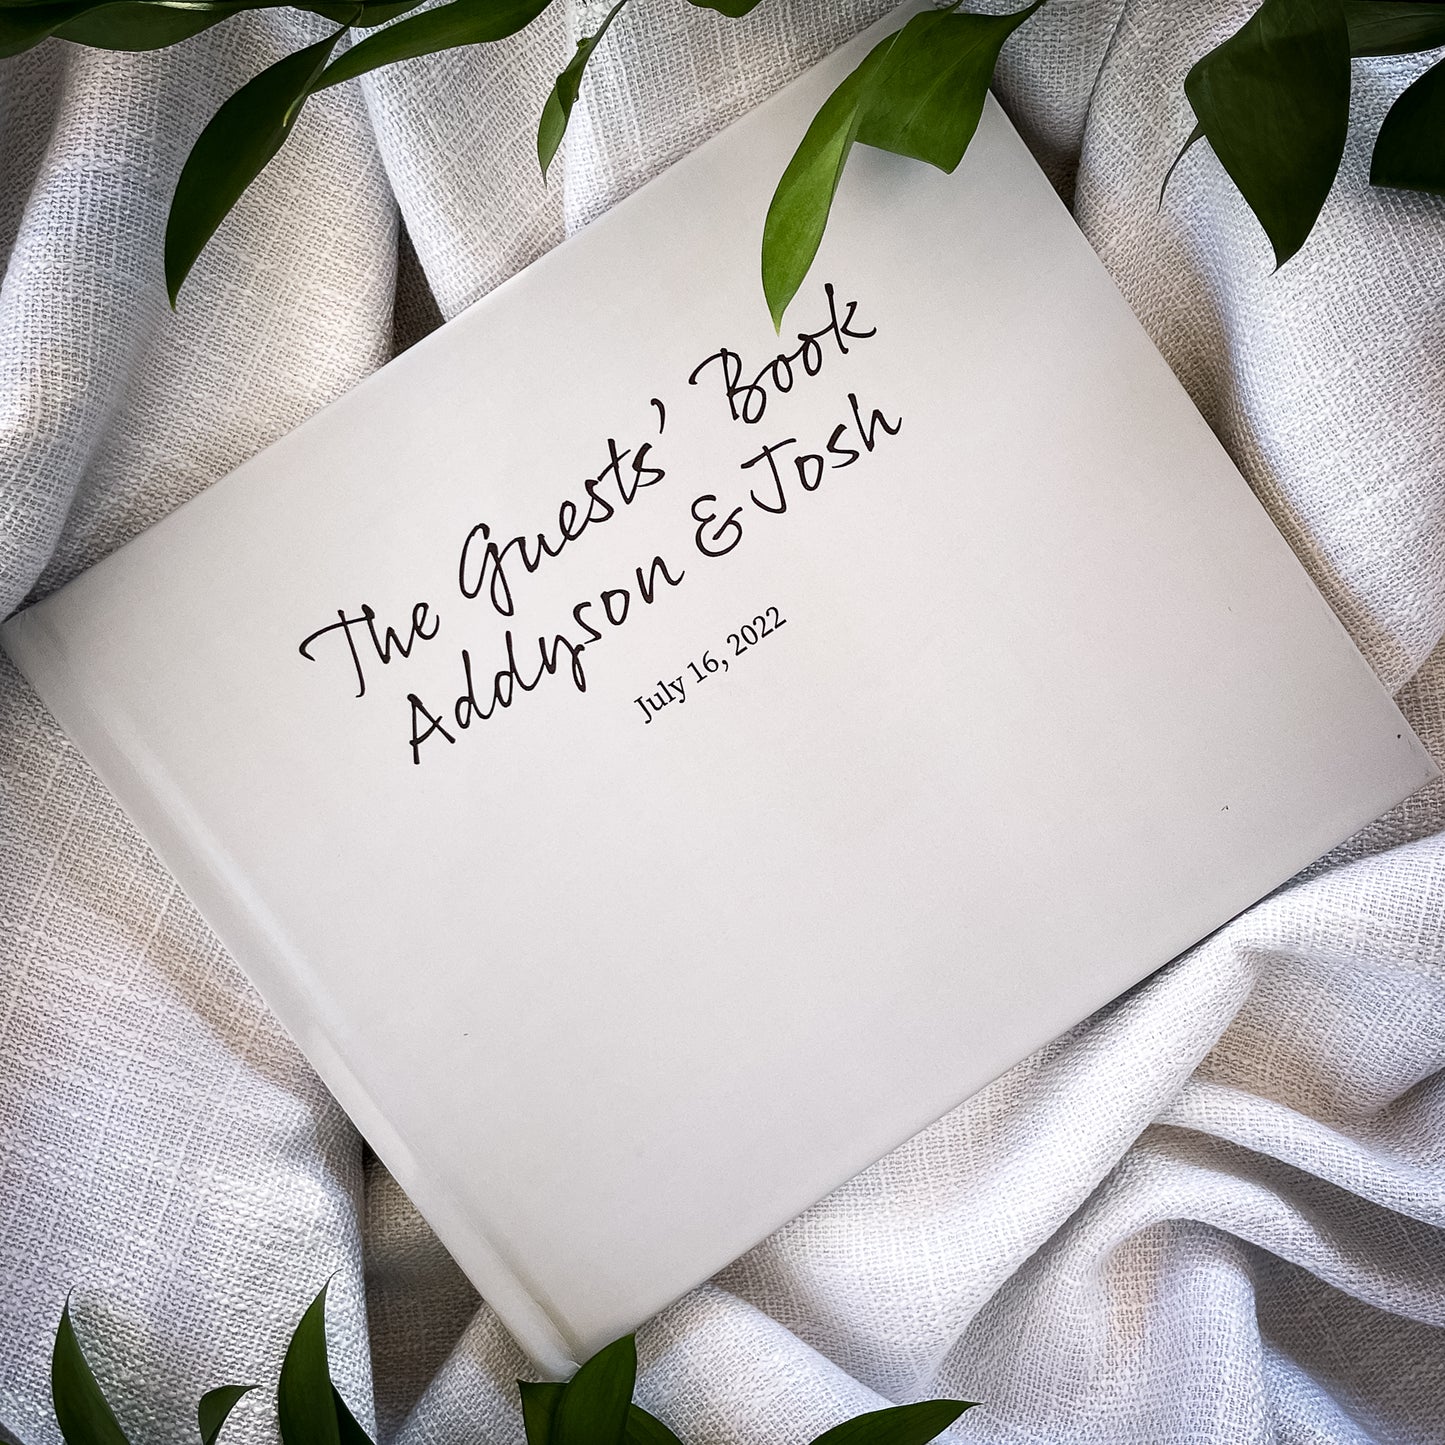 The Guests' Book